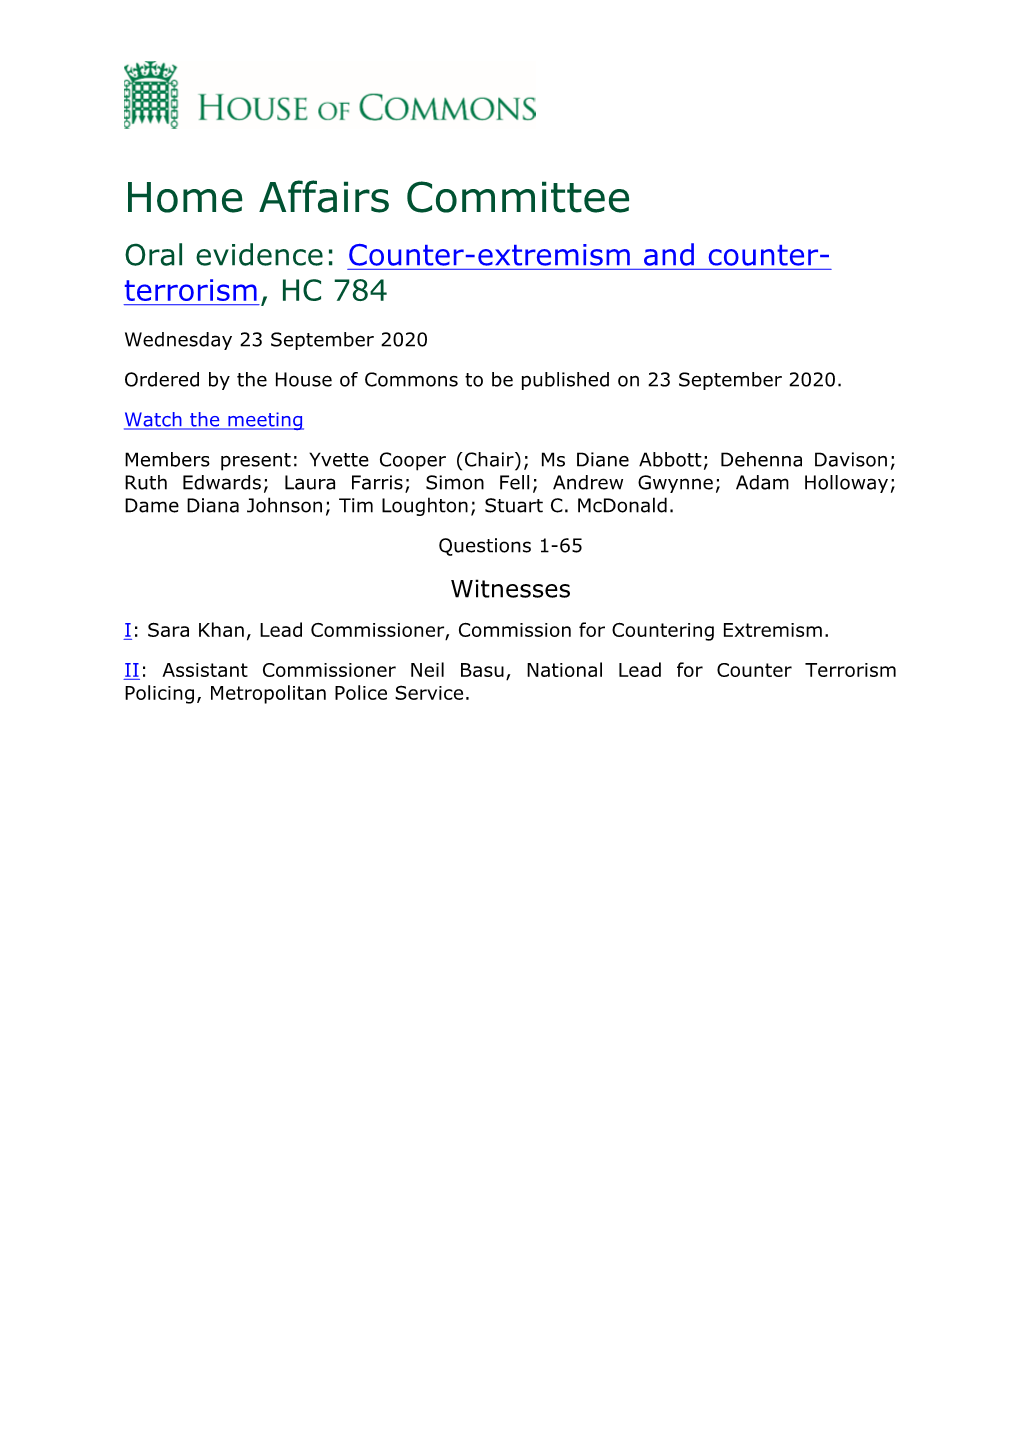 Home Affairs Committee Oral Evidence: Counter-Extremism and Counter- Terrorism, HC 784